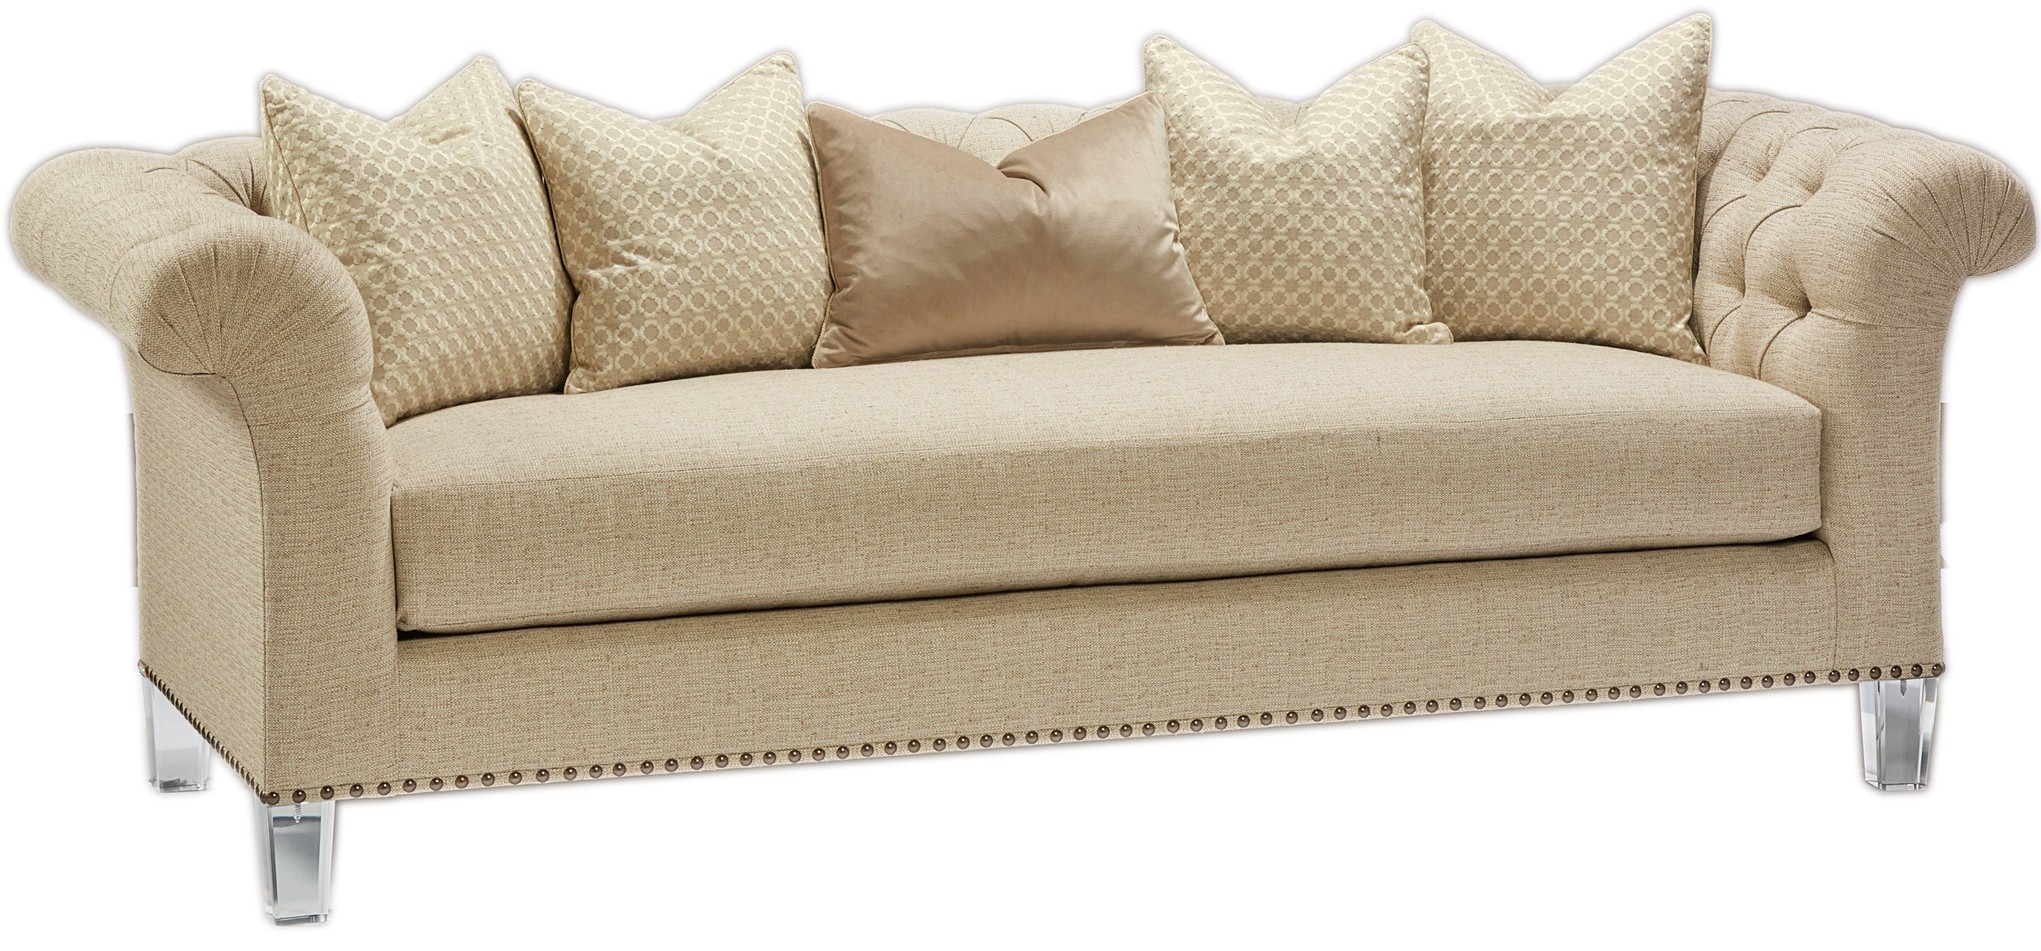 SOFA, COUCH & LOVESEAT Sofa 6069 from our modern Dakota collection